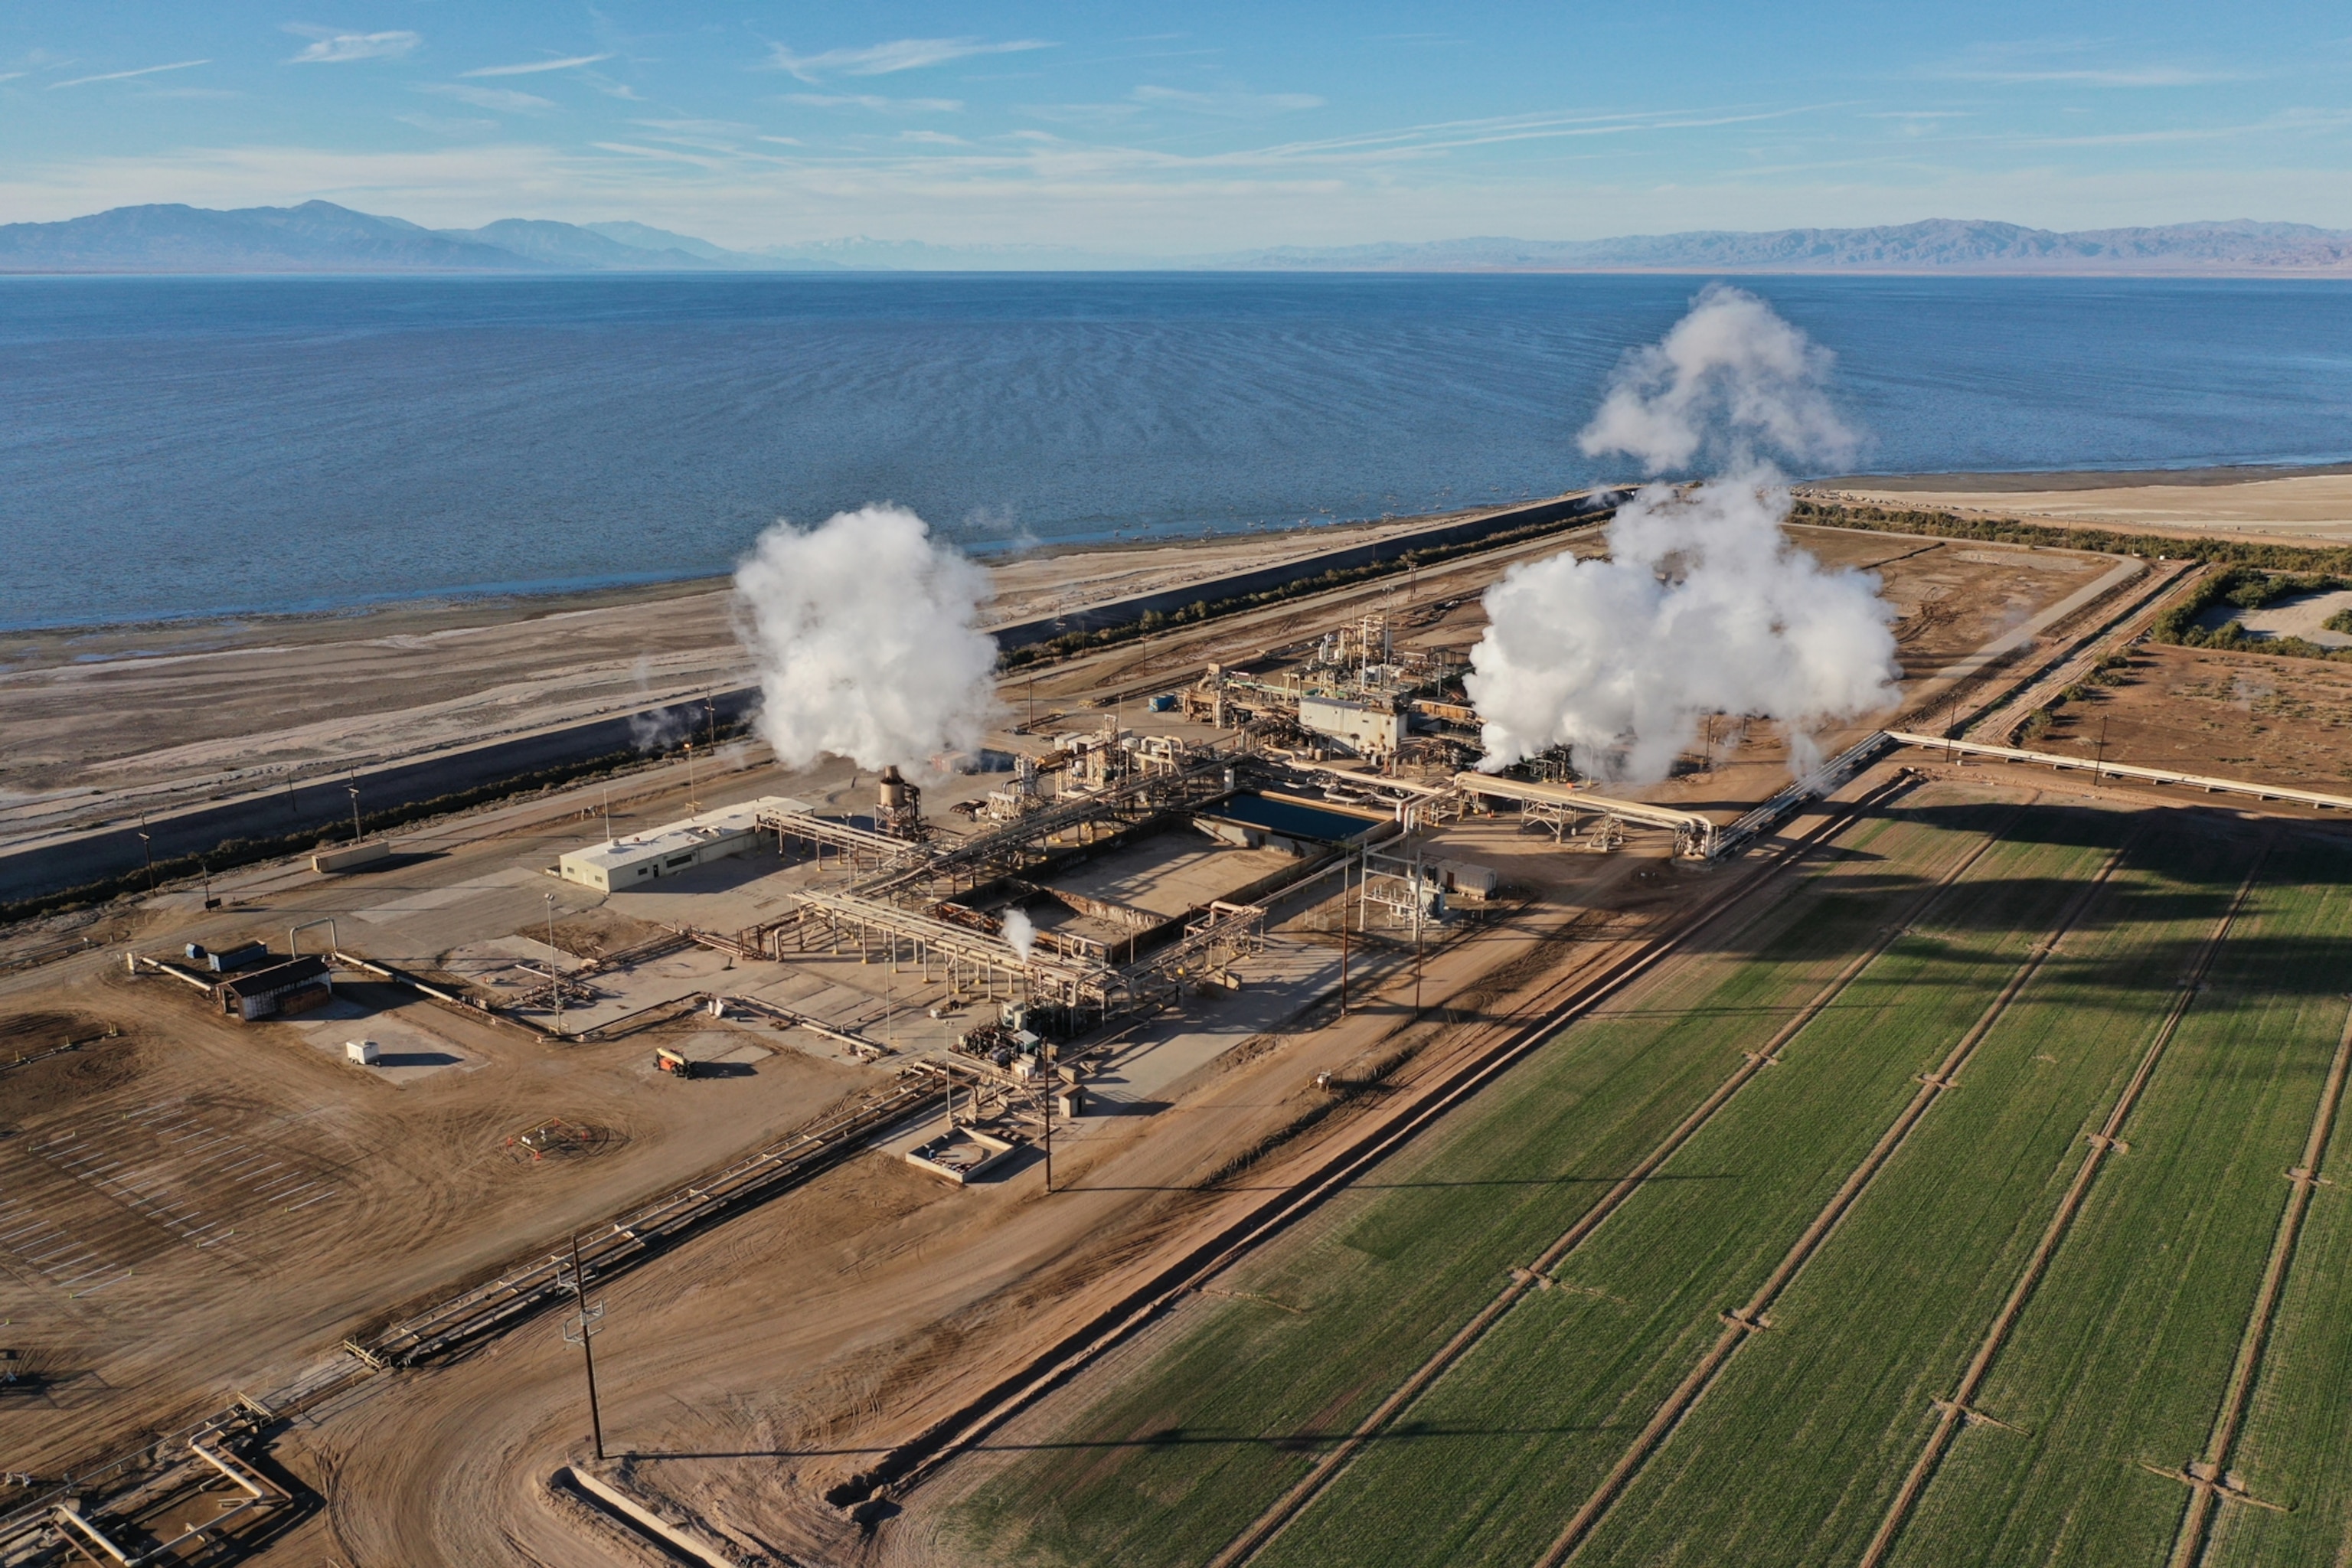 steam rises from a geothermal power plant situated next to a large body of water